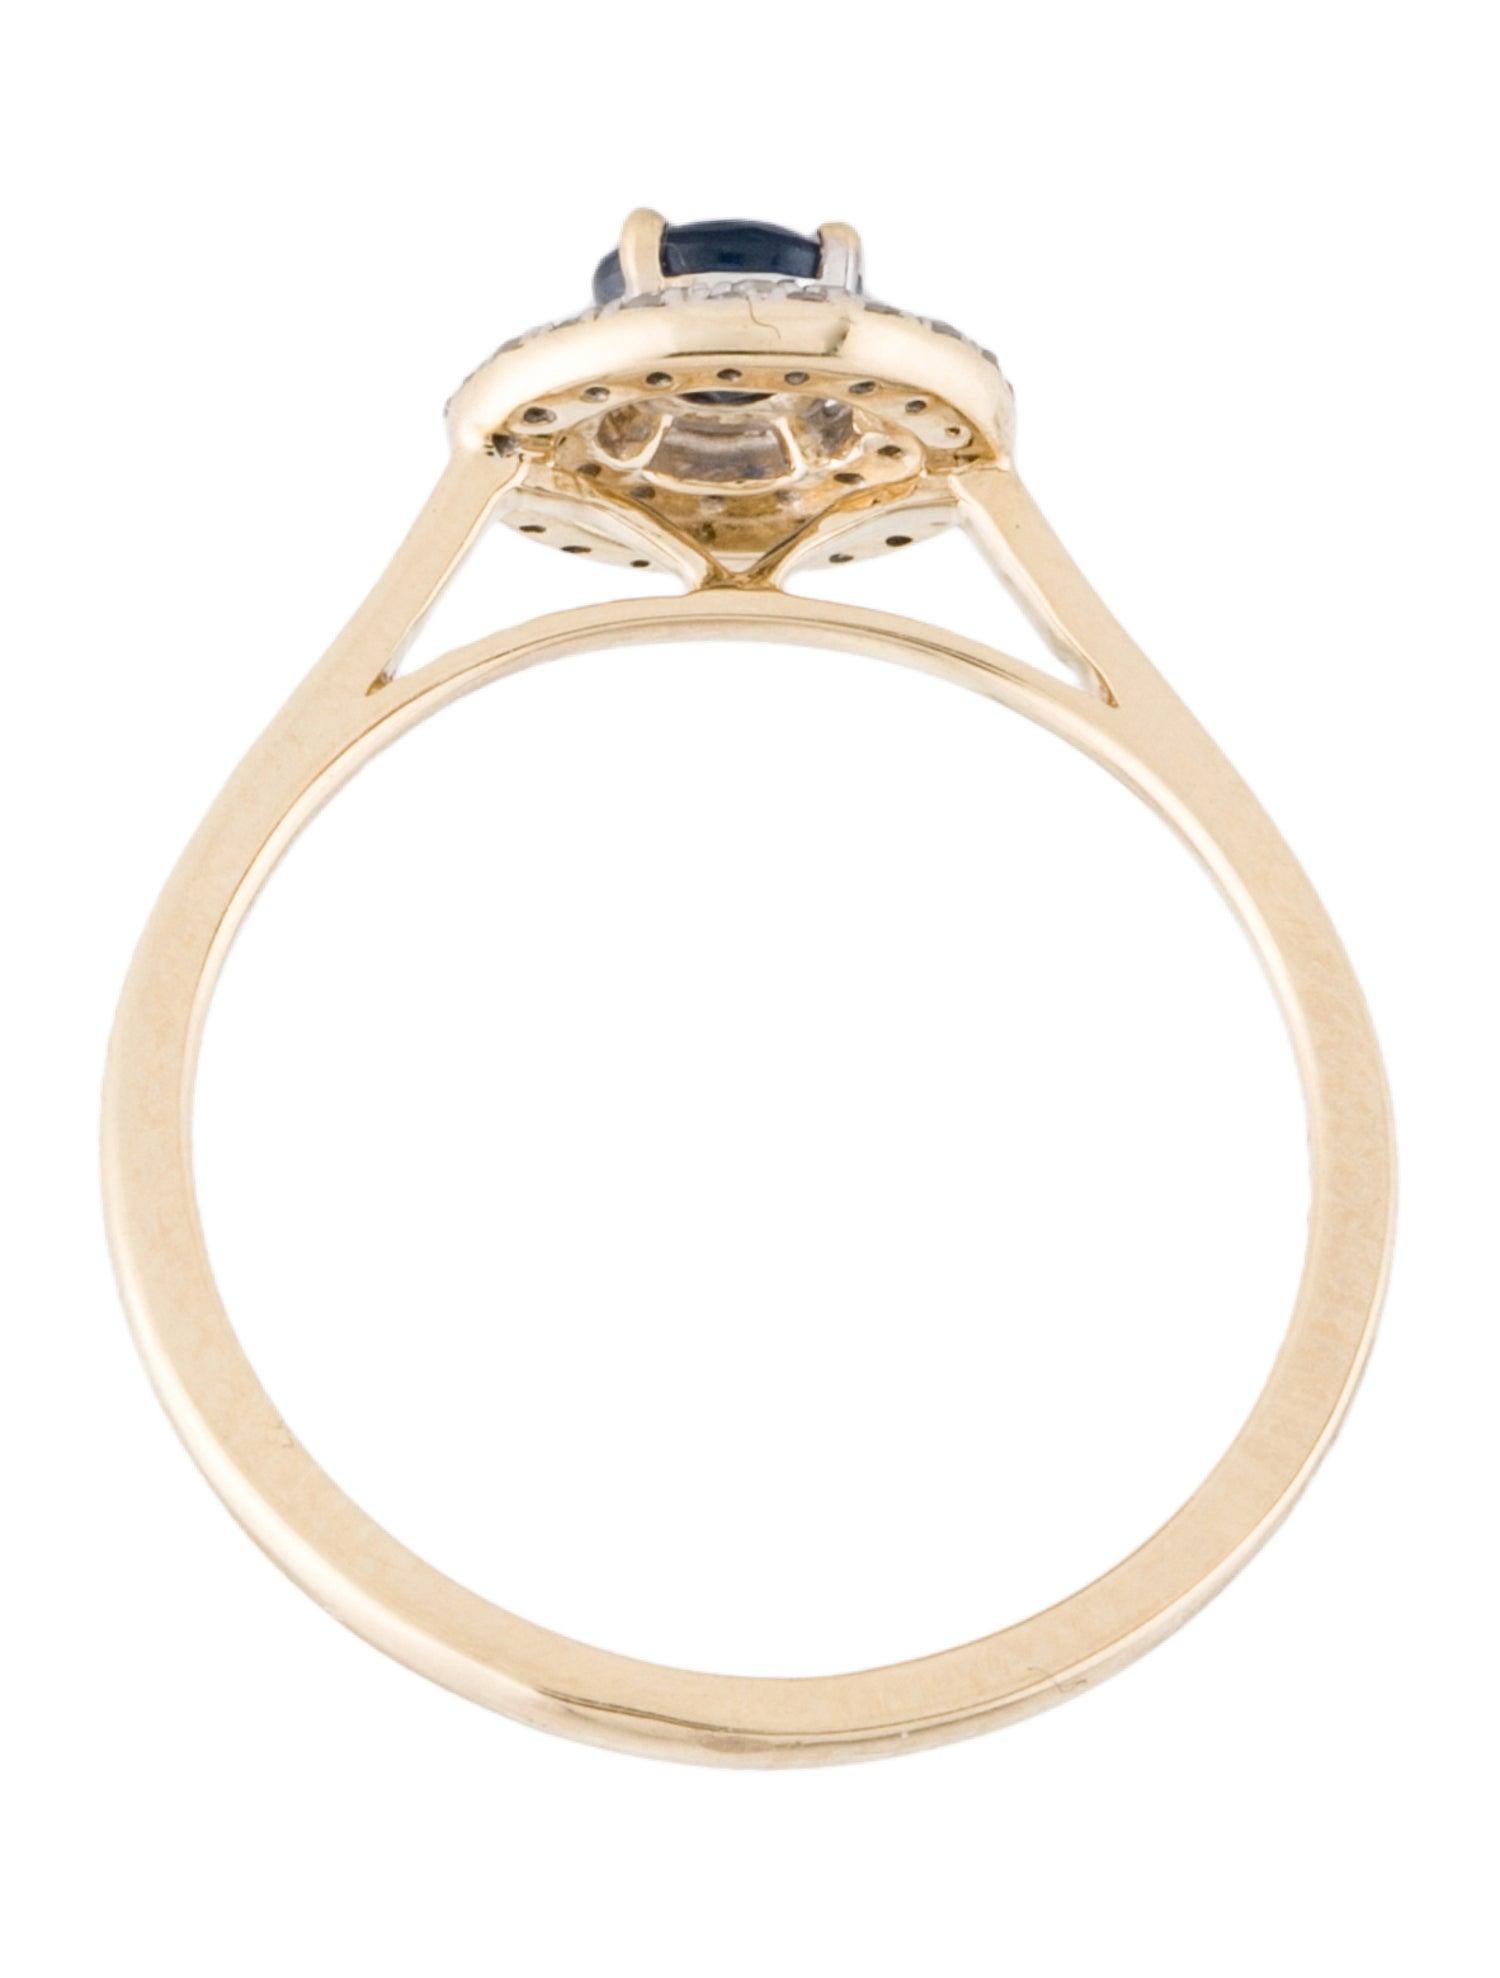 14K Sapphire & Diamond Cocktail Ring - Size 6.5  Elegant Gemstone Jewelry In New Condition For Sale In Holtsville, NY